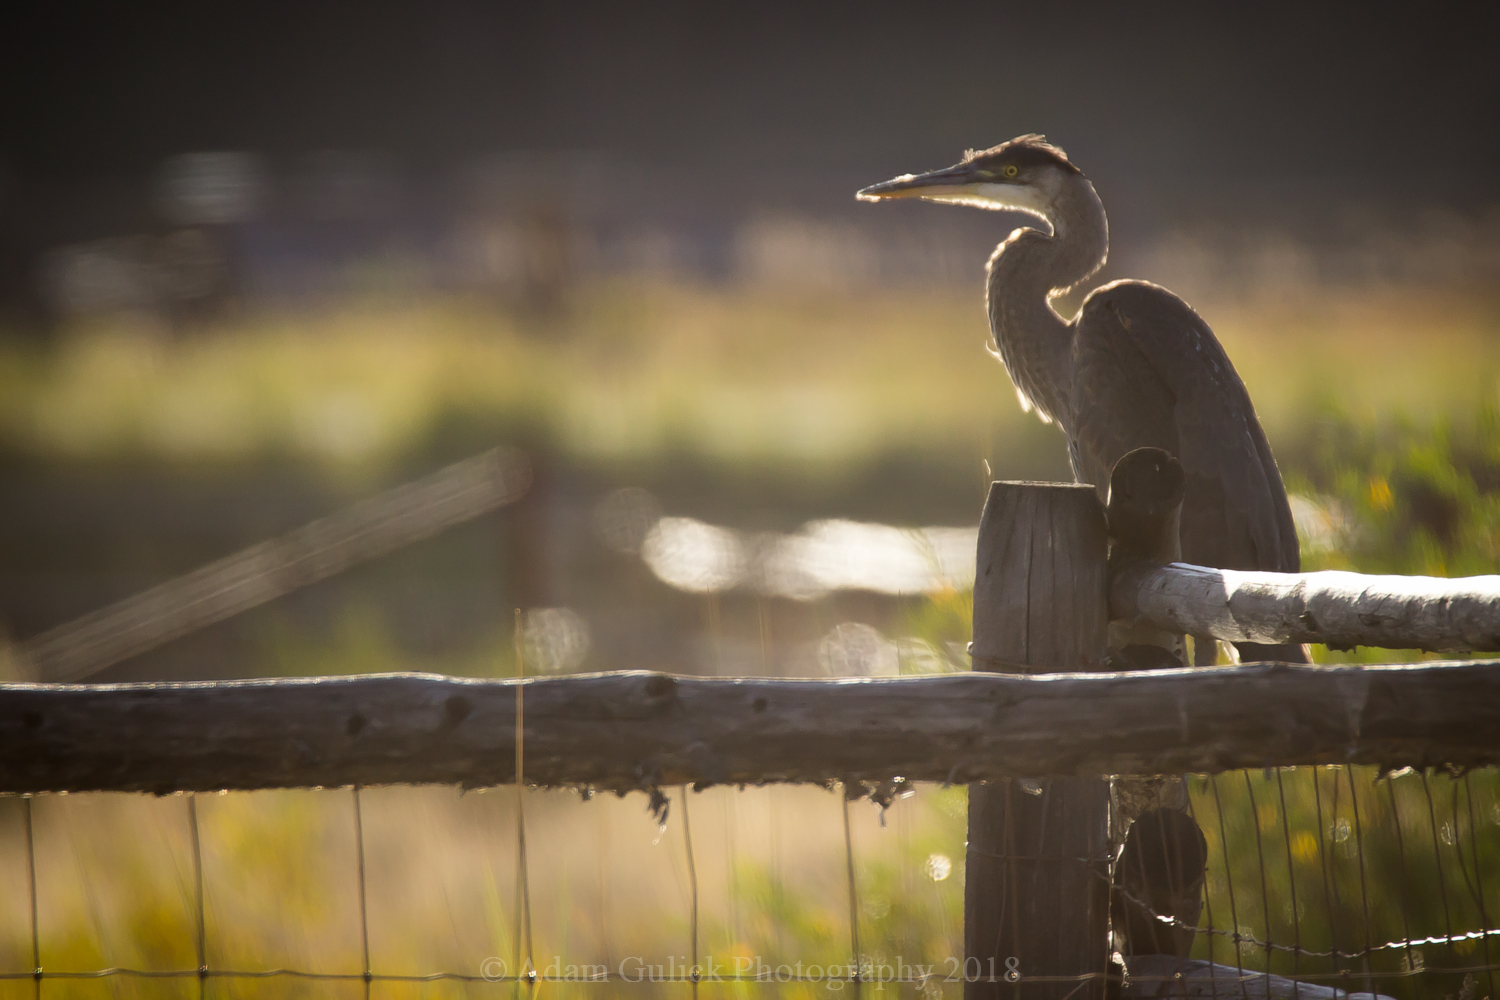 long neck bird on fence Stanley, ID | Stanley chamber